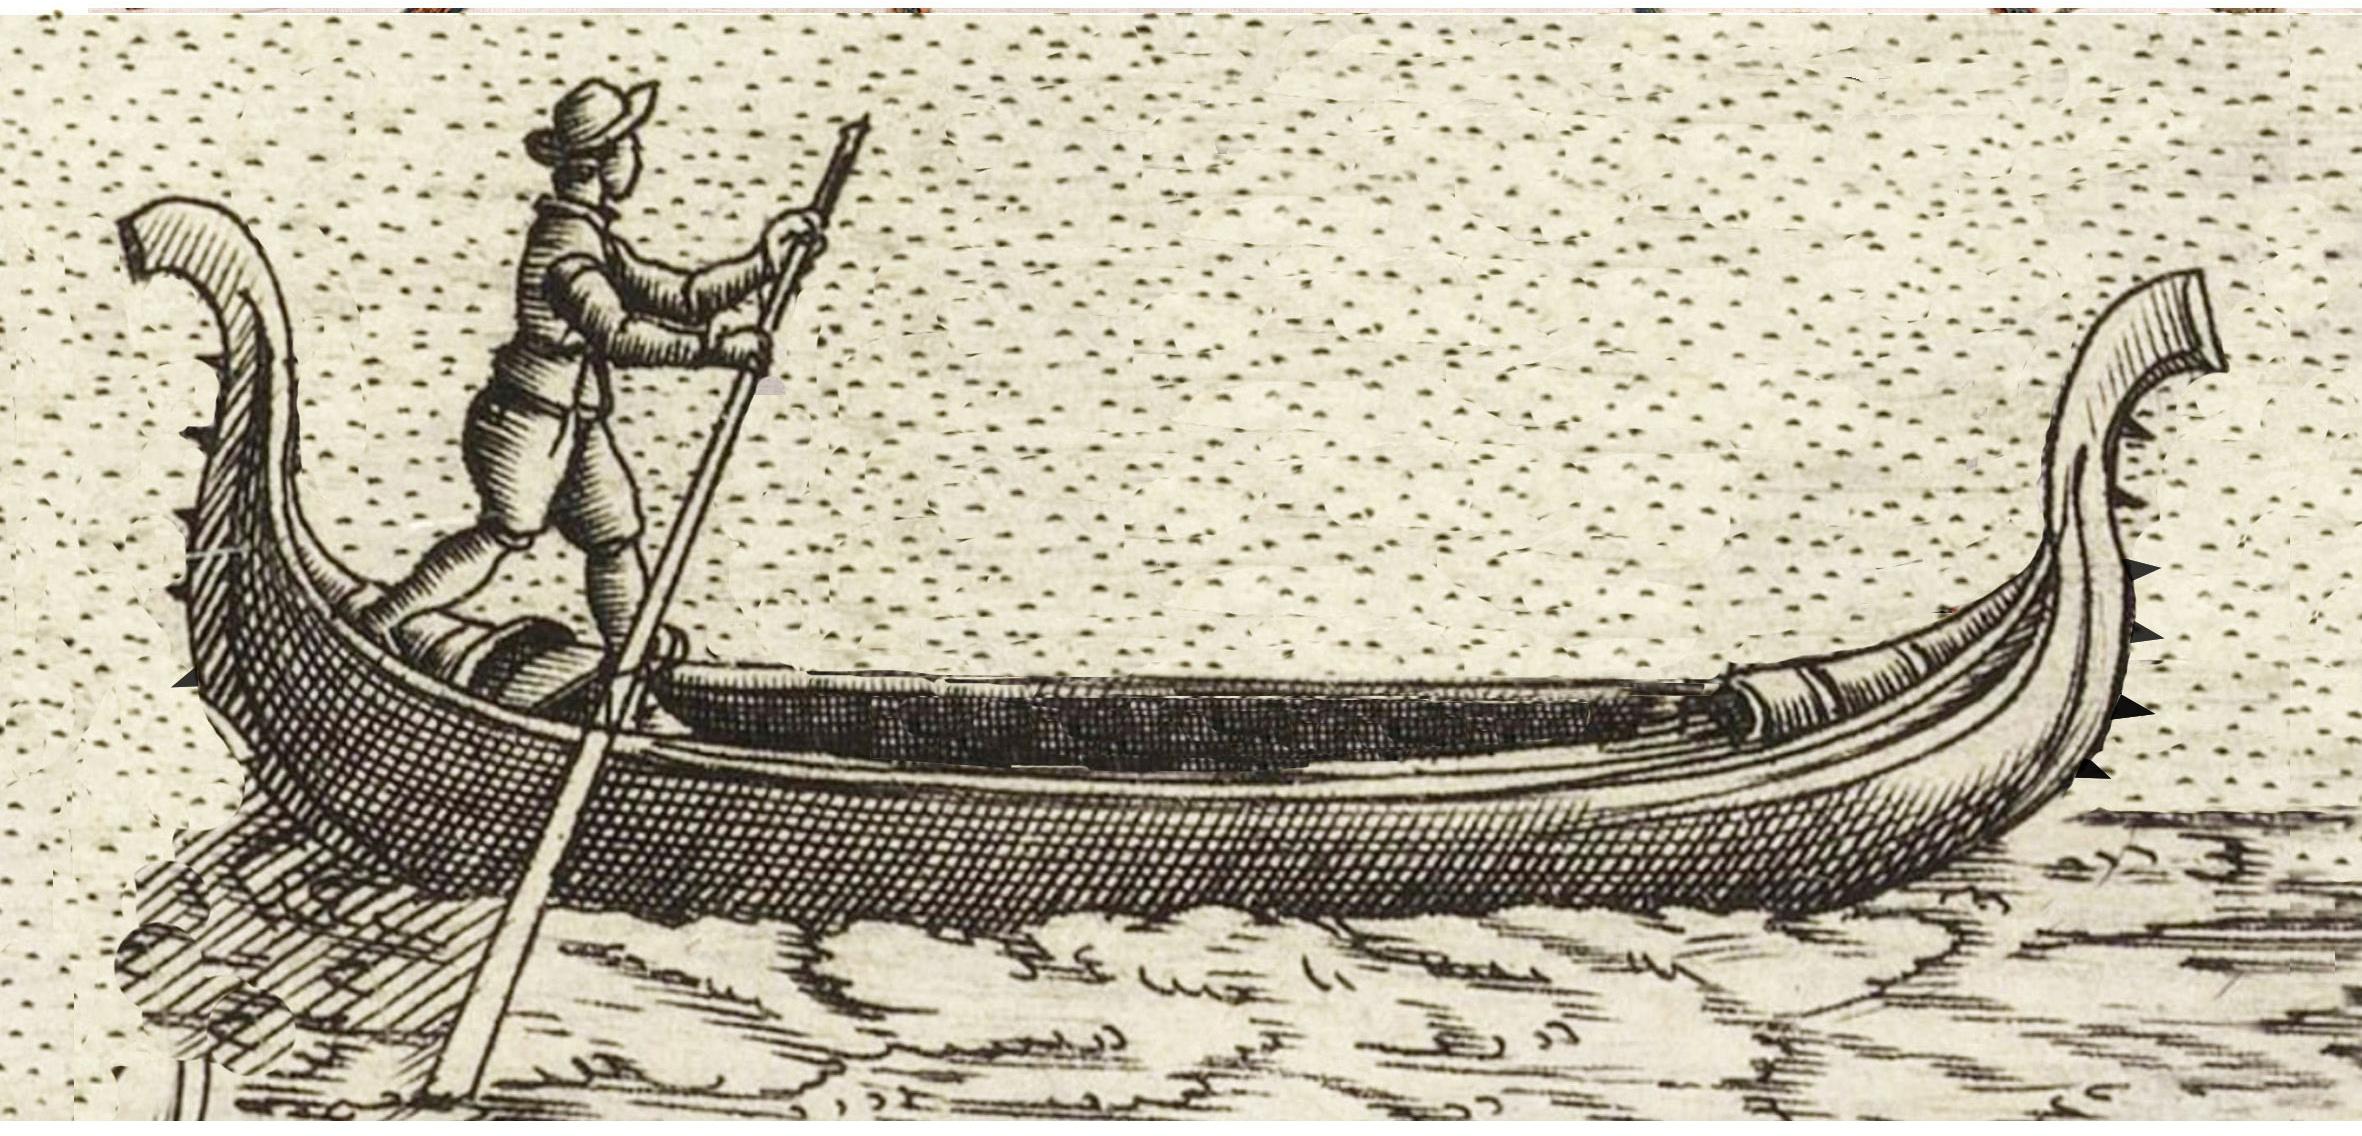 A gondola of the assault type (inspired by Norman-Viking pirate ships) built from 1509 until the end of the 17th century. (from illustrations by Jacopo Franco (1610) in the Biblioteca Nazionale Marciana, Venice)